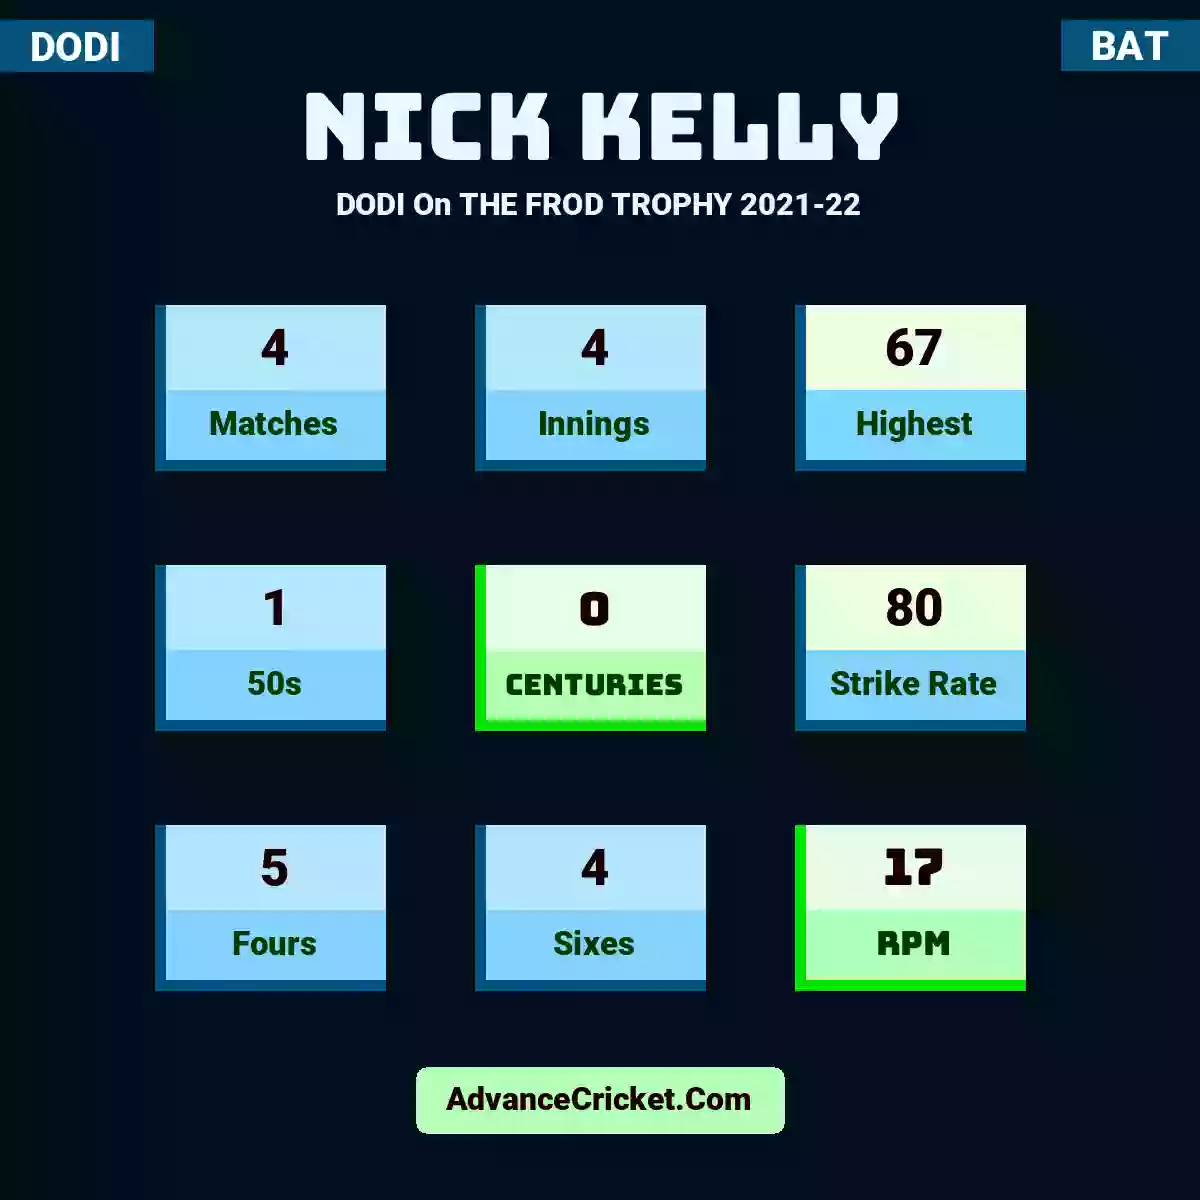 Nick Kelly DODI  On THE FROD TROPHY 2021-22, Nick Kelly played 4 matches, scored 67 runs as highest, 1 half-centuries, and 0 centuries, with a strike rate of 80. N.Kelly hit 5 fours and 4 sixes, with an RPM of 17.